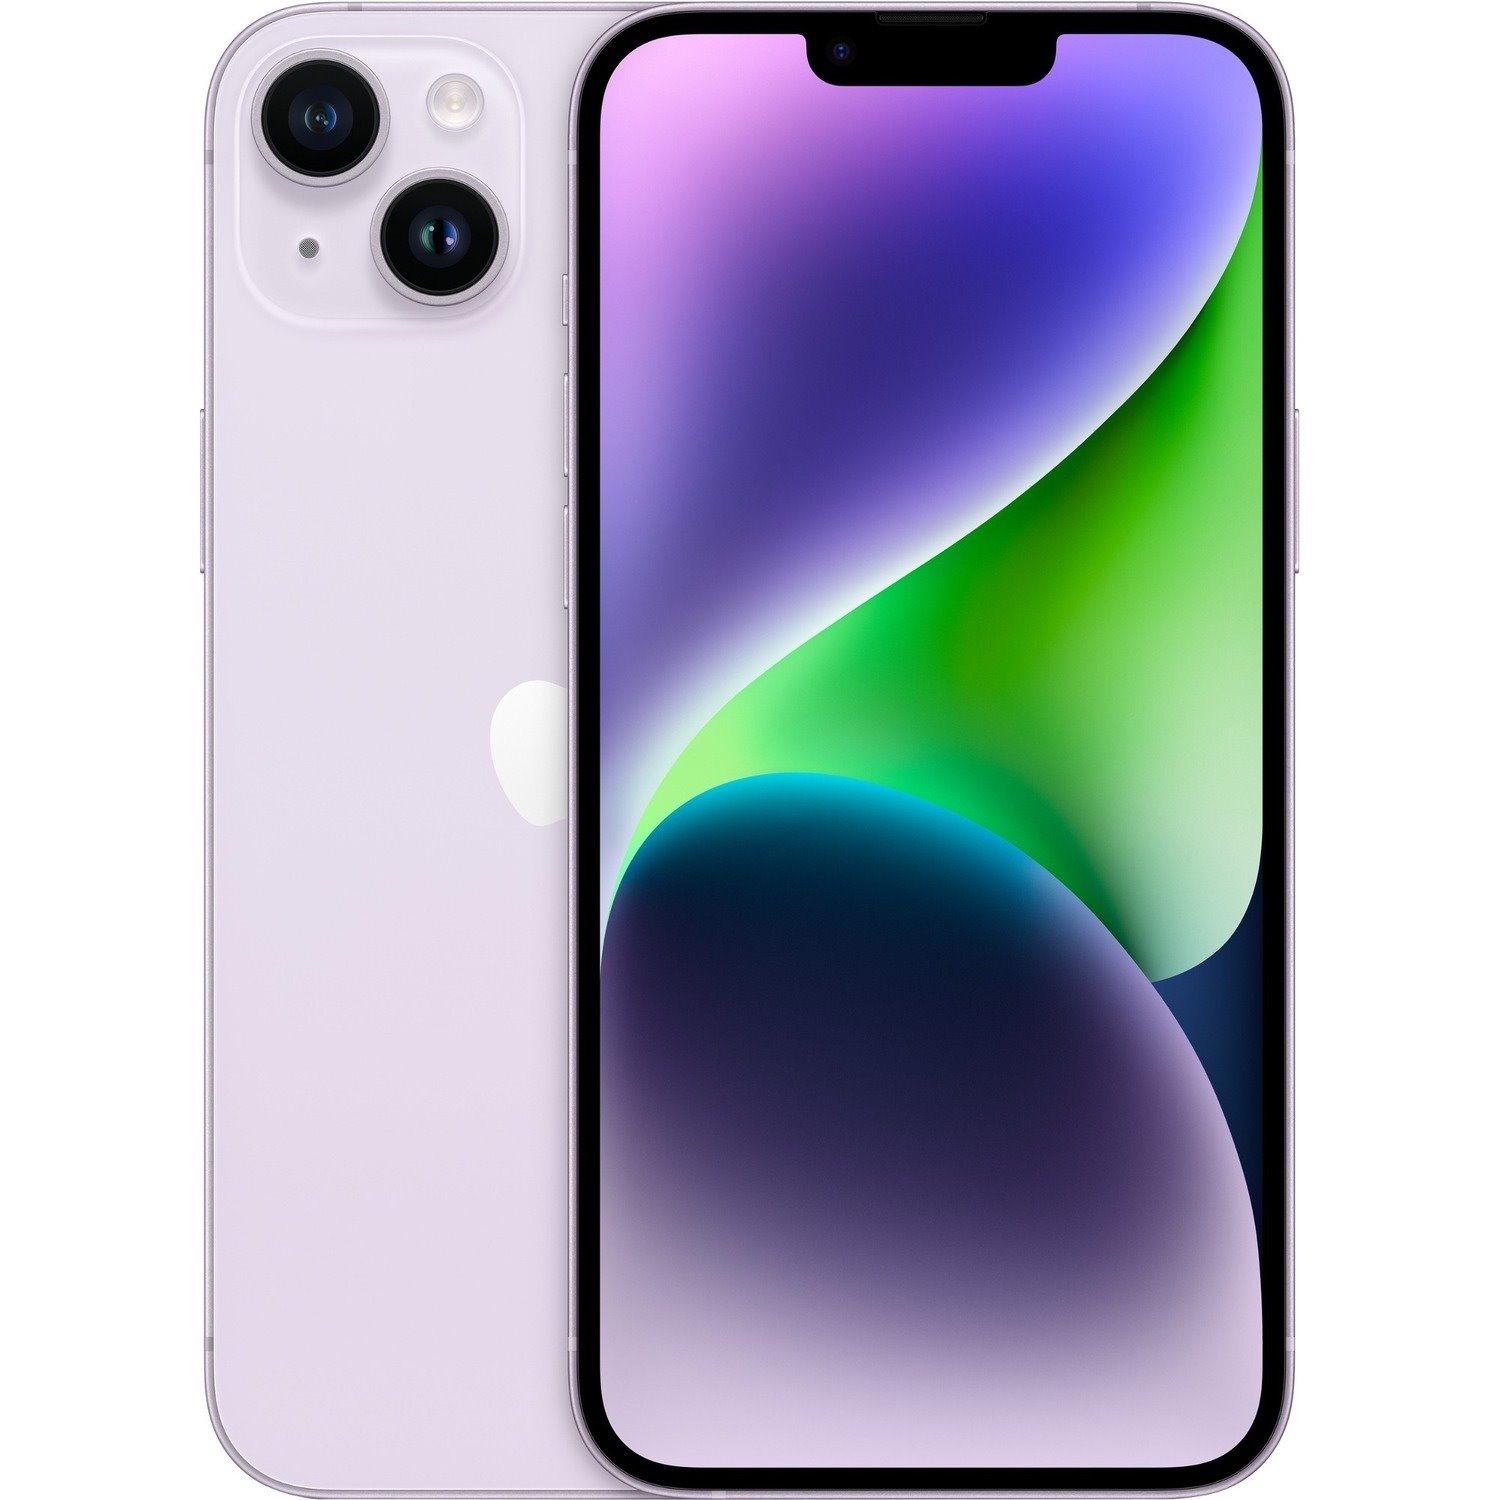 Apple iPhone 14 A2882 512 GB Smartphone - 6.1" OLED 2532 x 1170 - Hexa-core (AvalancheDual-core (2 Core) 3.23 GHz + Blizzard Quad-core (4 Core) 1.82 GHz - 6 GB RAM - iOS 16 - 5G - Purple